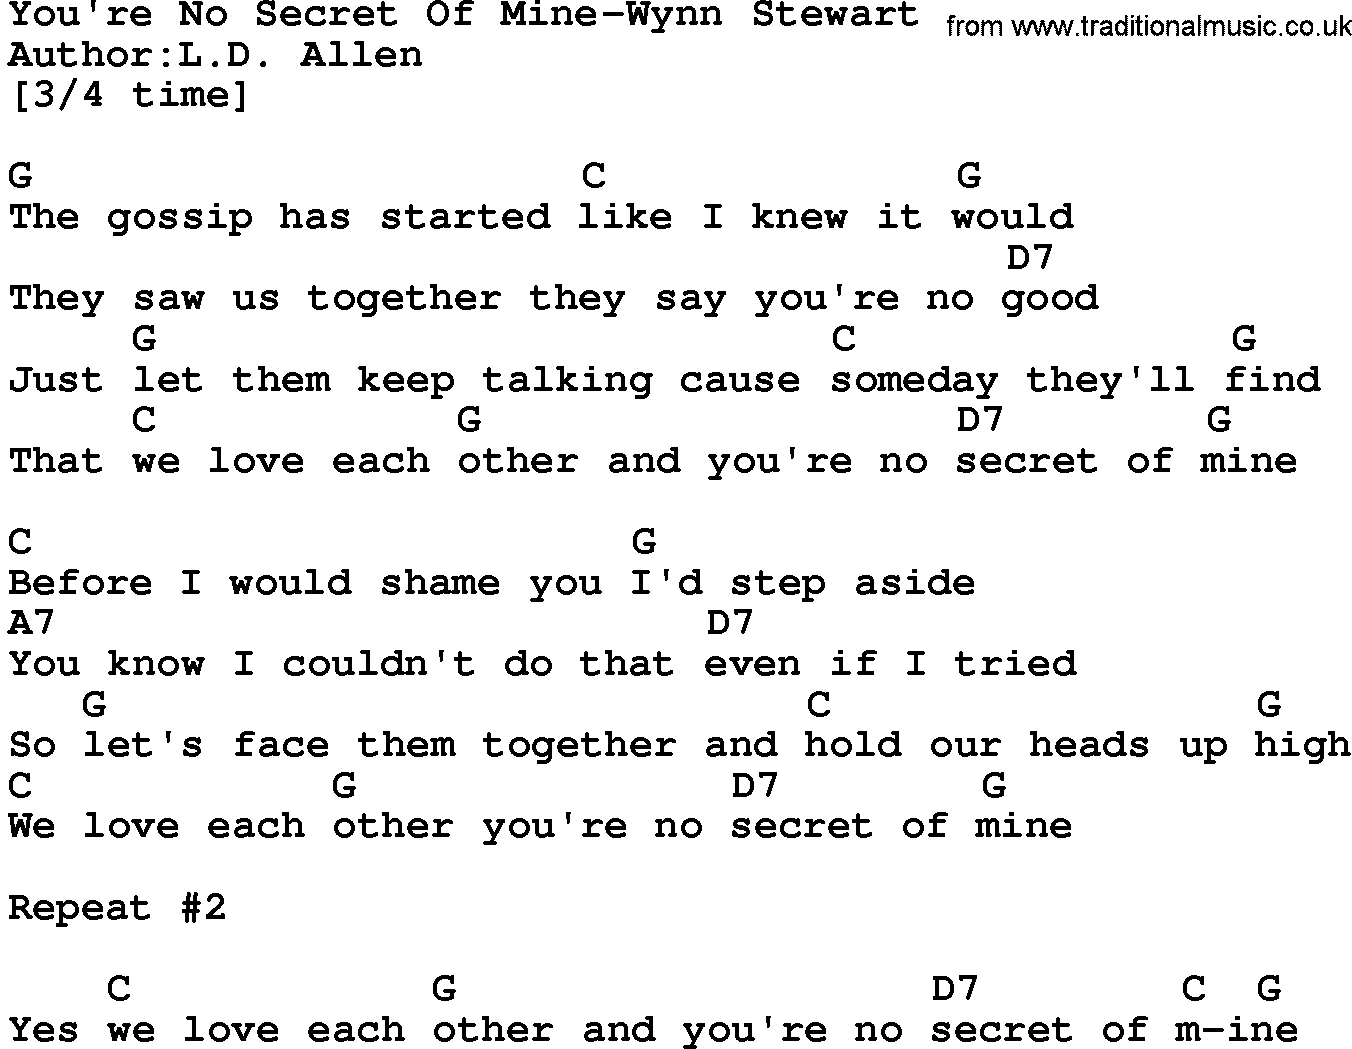 Country music song: You're No Secret Of Mine-Wynn Stewart lyrics and chords